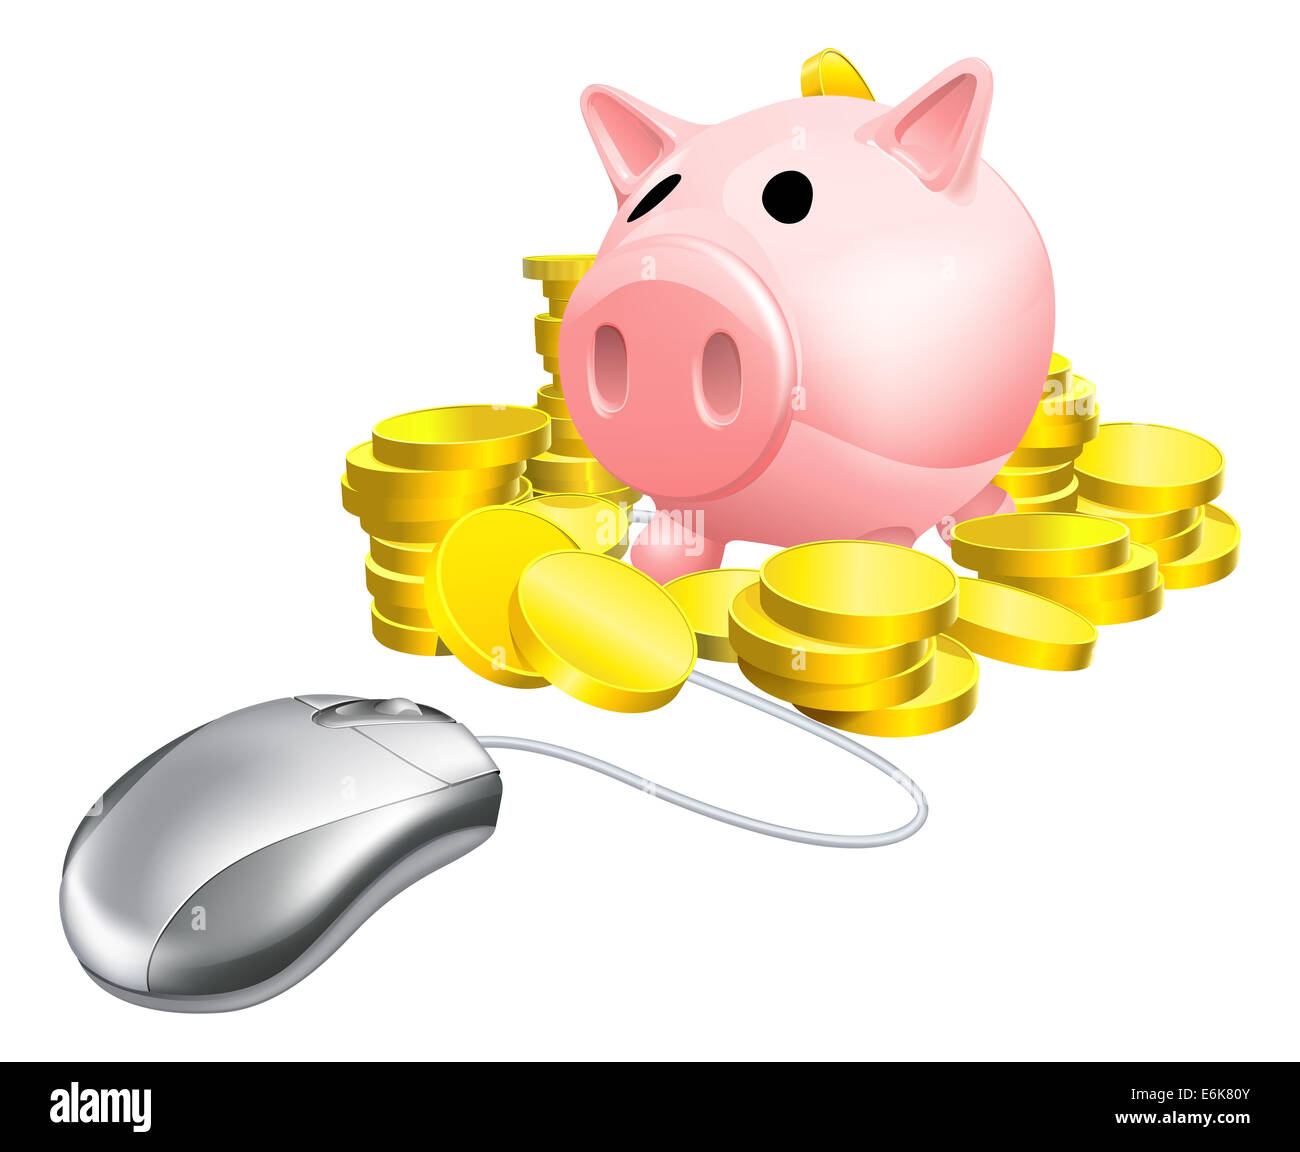 Mouse Piggy bank concept of a computer mouse connected to piggy bank with gold coins. Concept for internet banking or similar Stock Photo